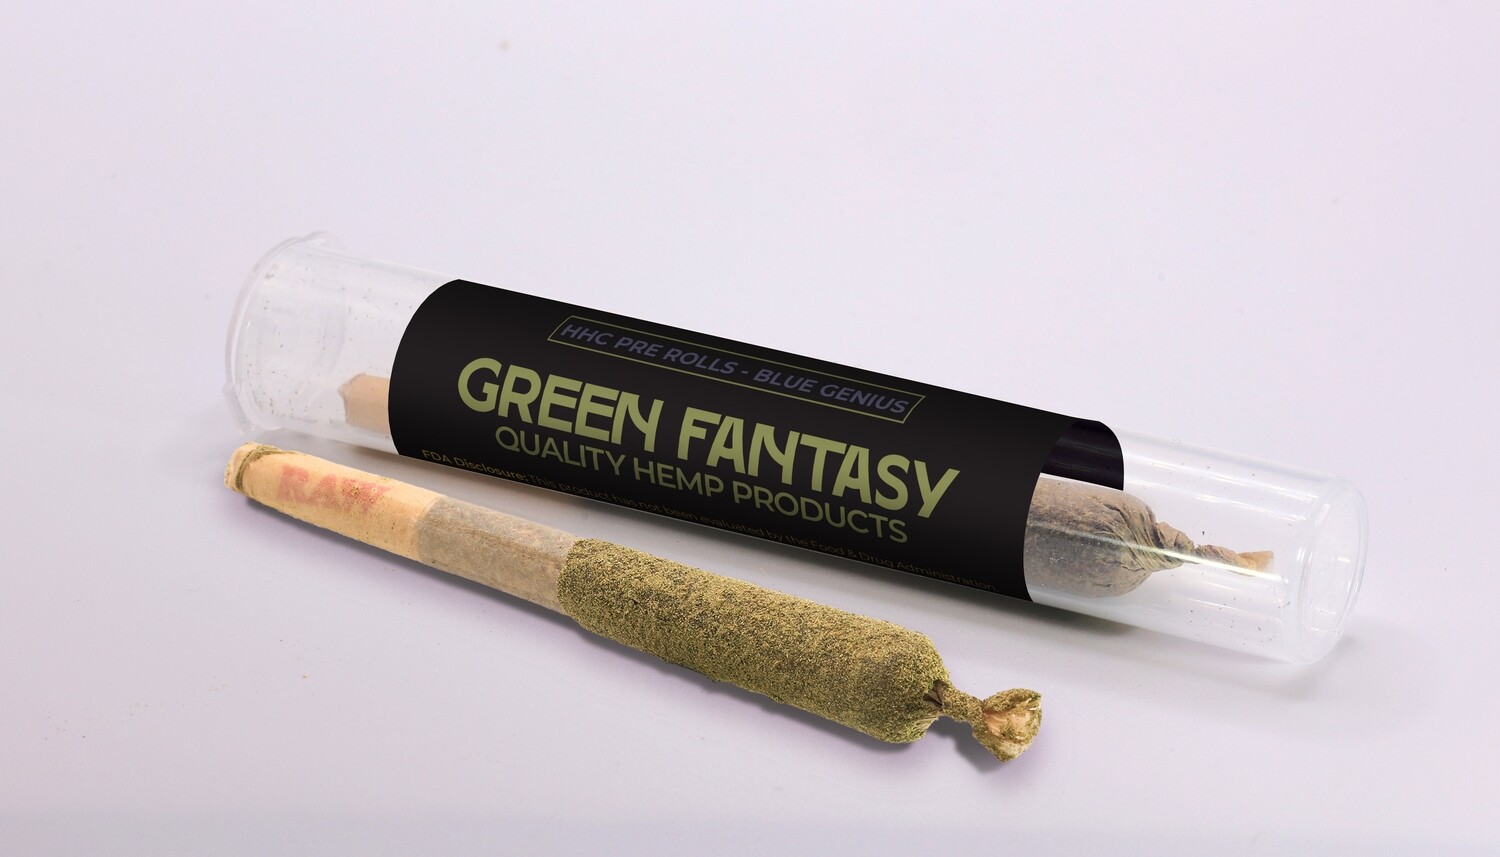 HHC Pre-Rolls Blue Genius
- From 2 PIECES